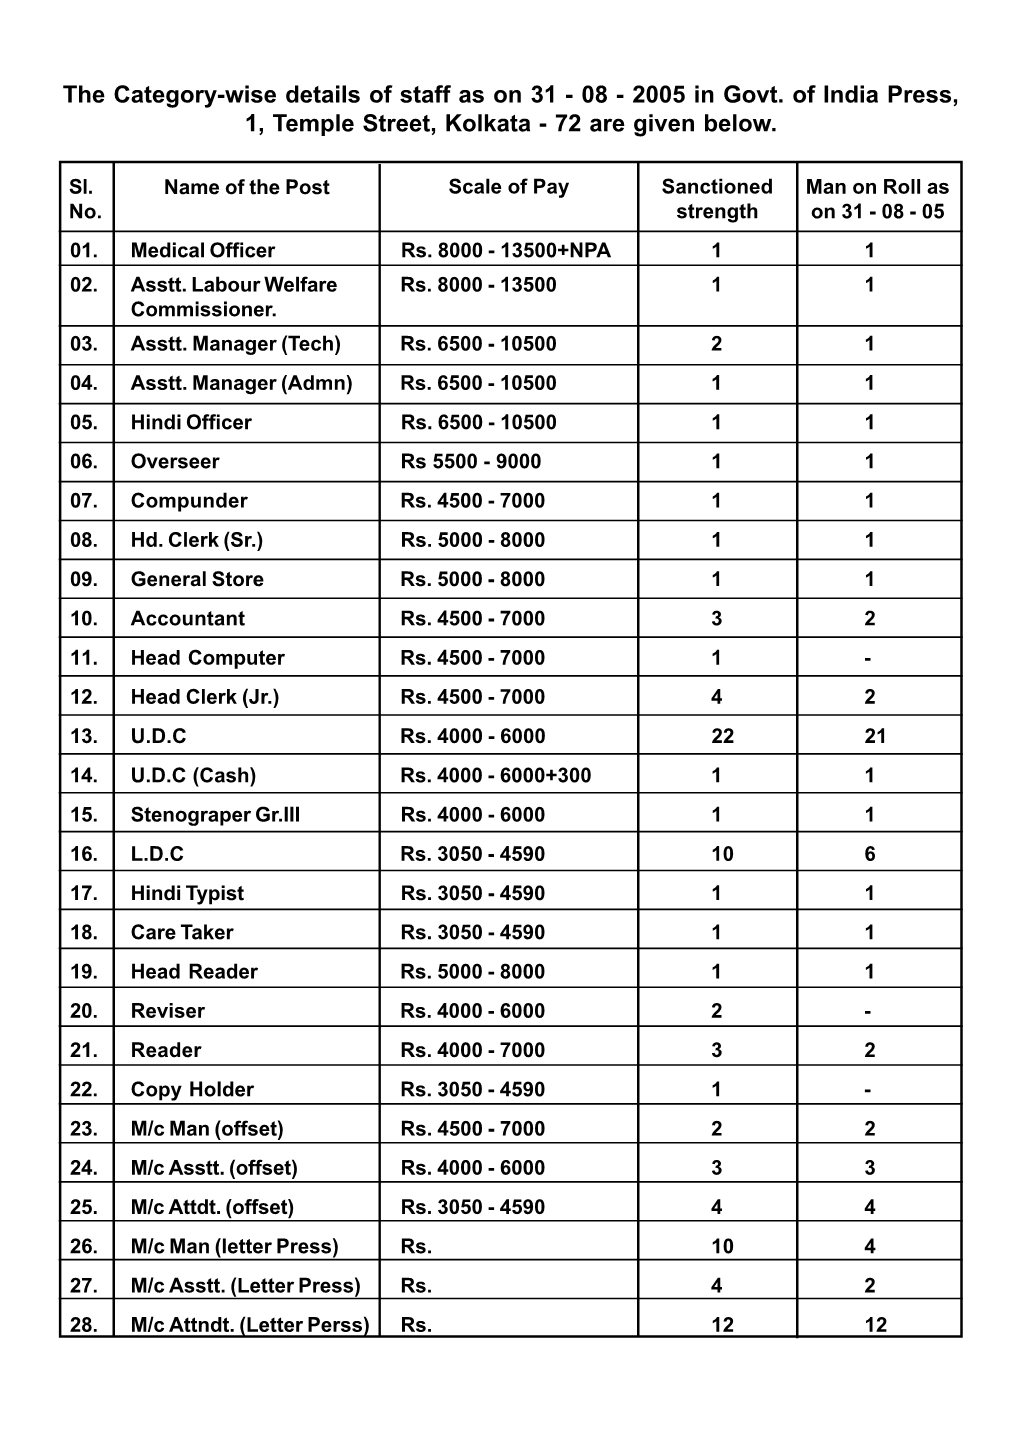 2005 in Govt. of India Press, 1, Temple Street, Kolkata - 72 Are Given Below